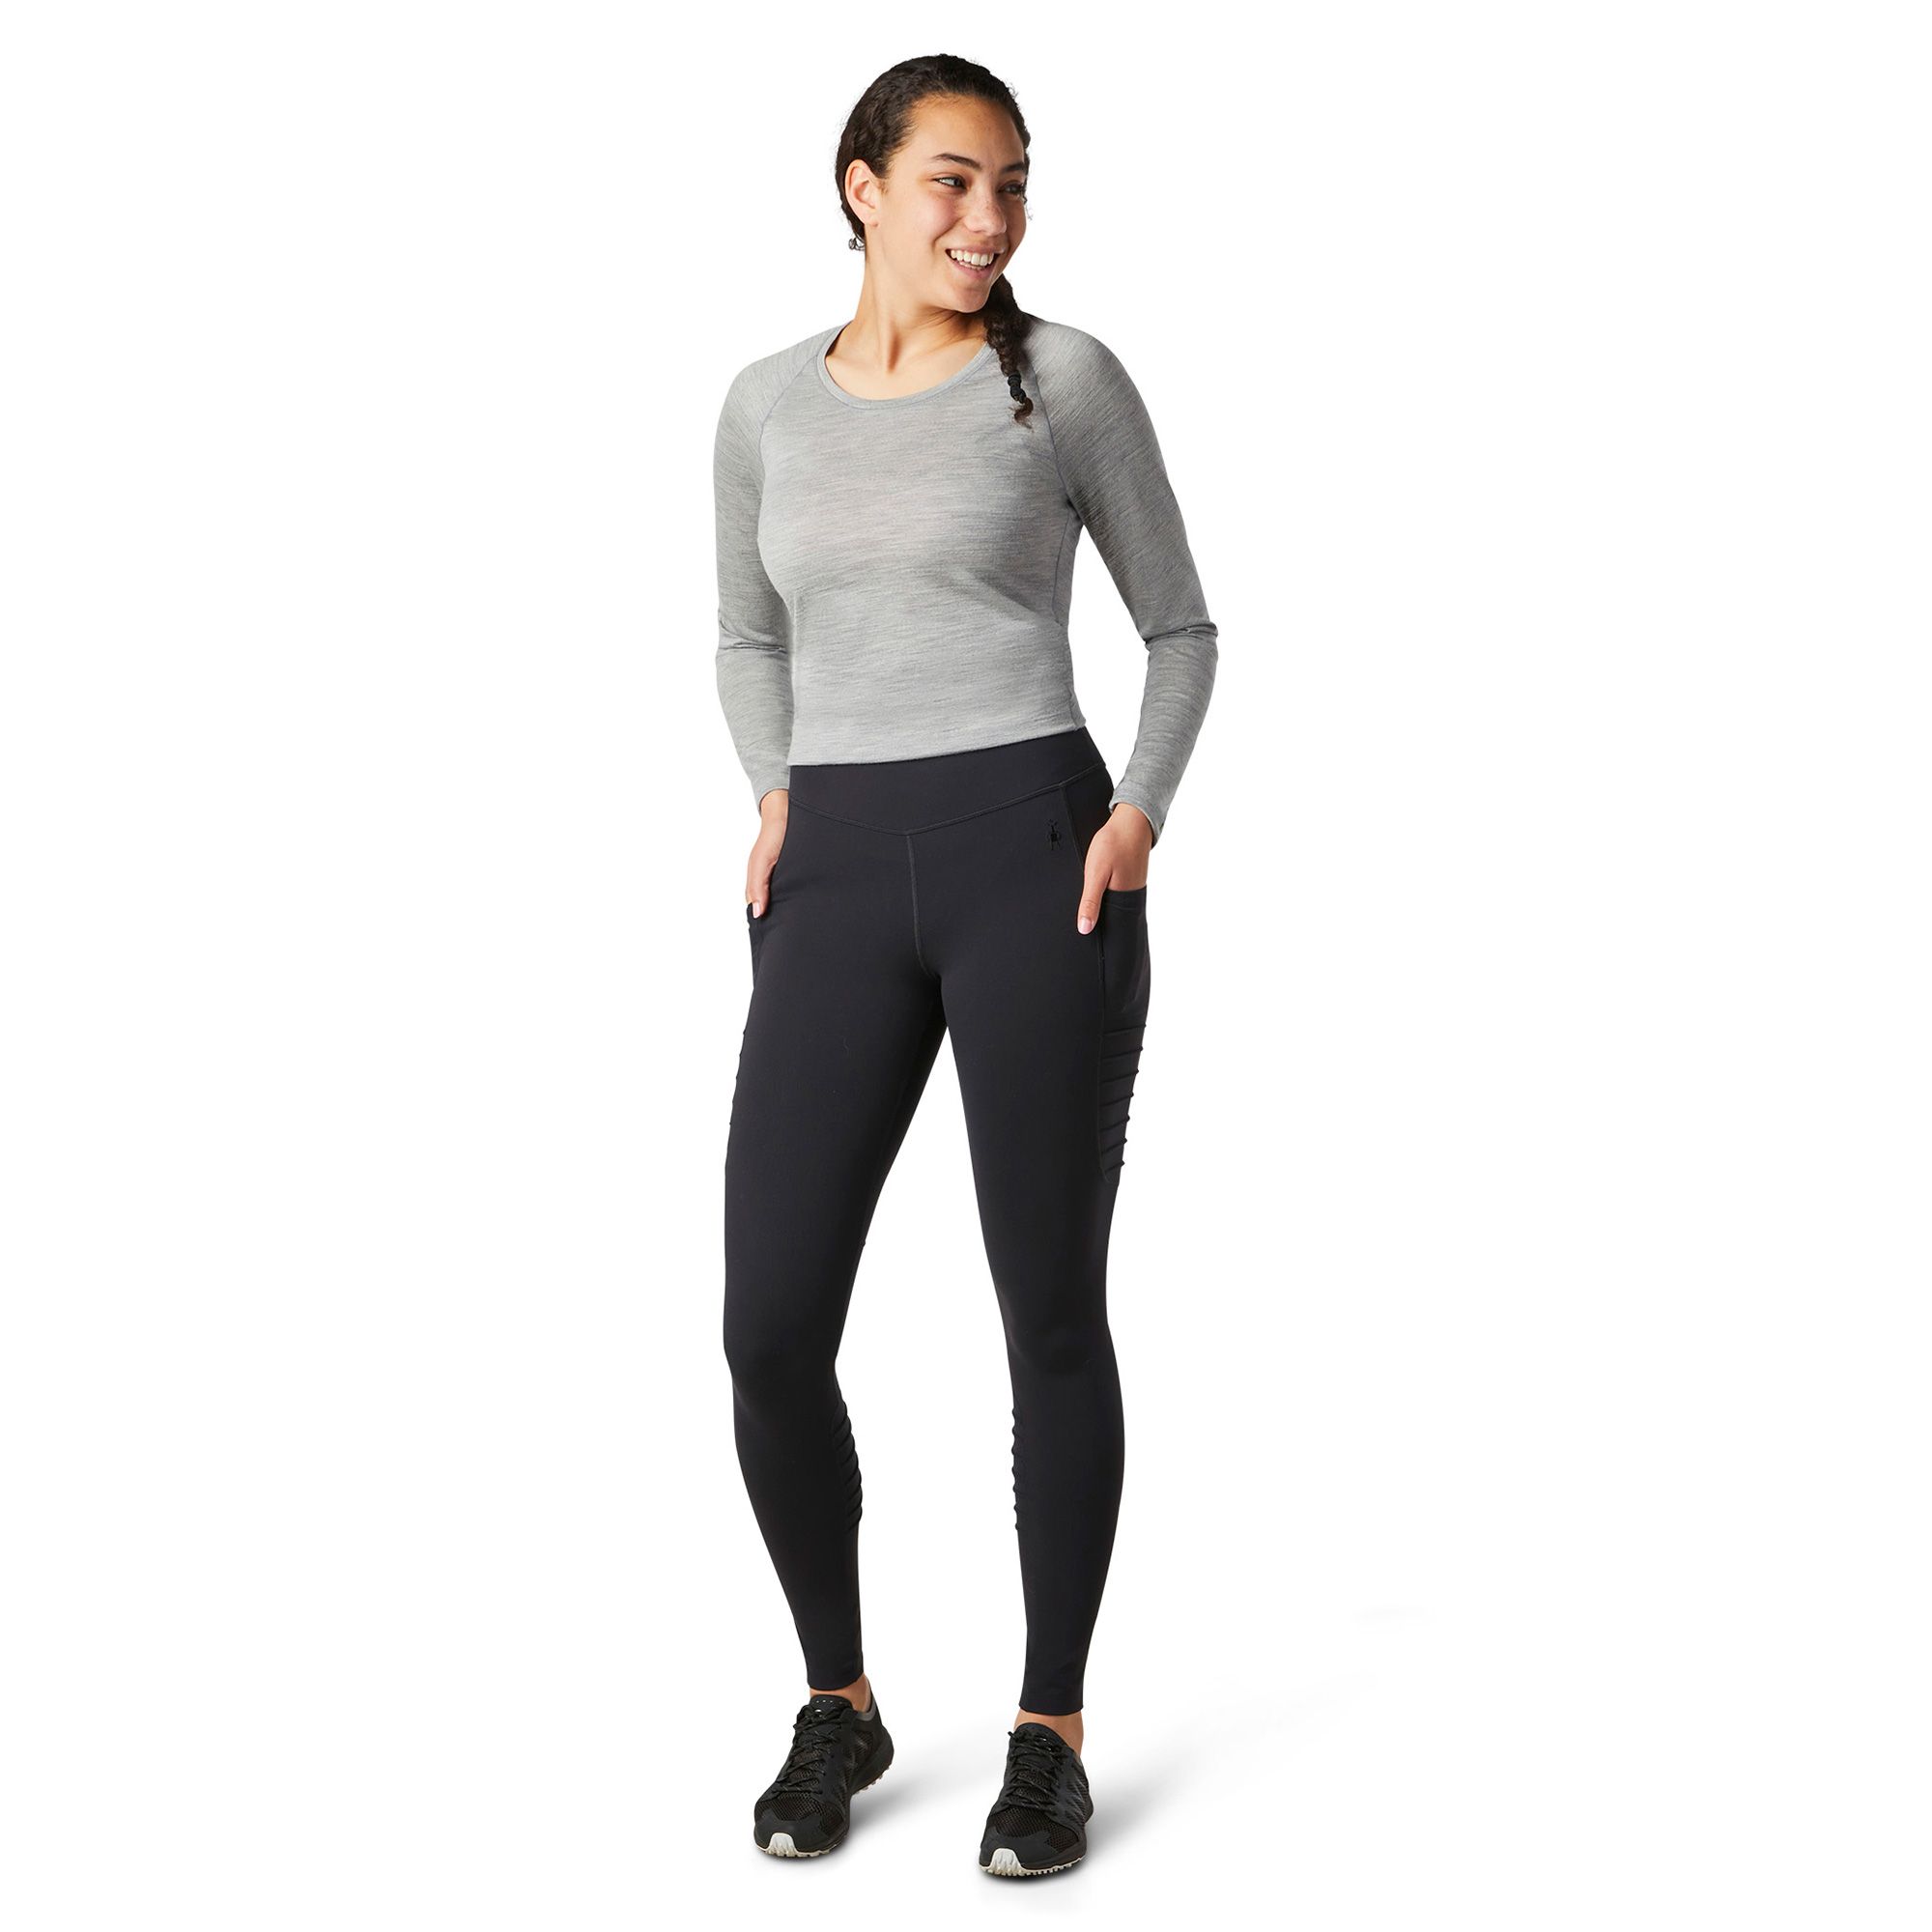 Leggings  Cheap Chico's & Winona Shop Online Outlet For Womens